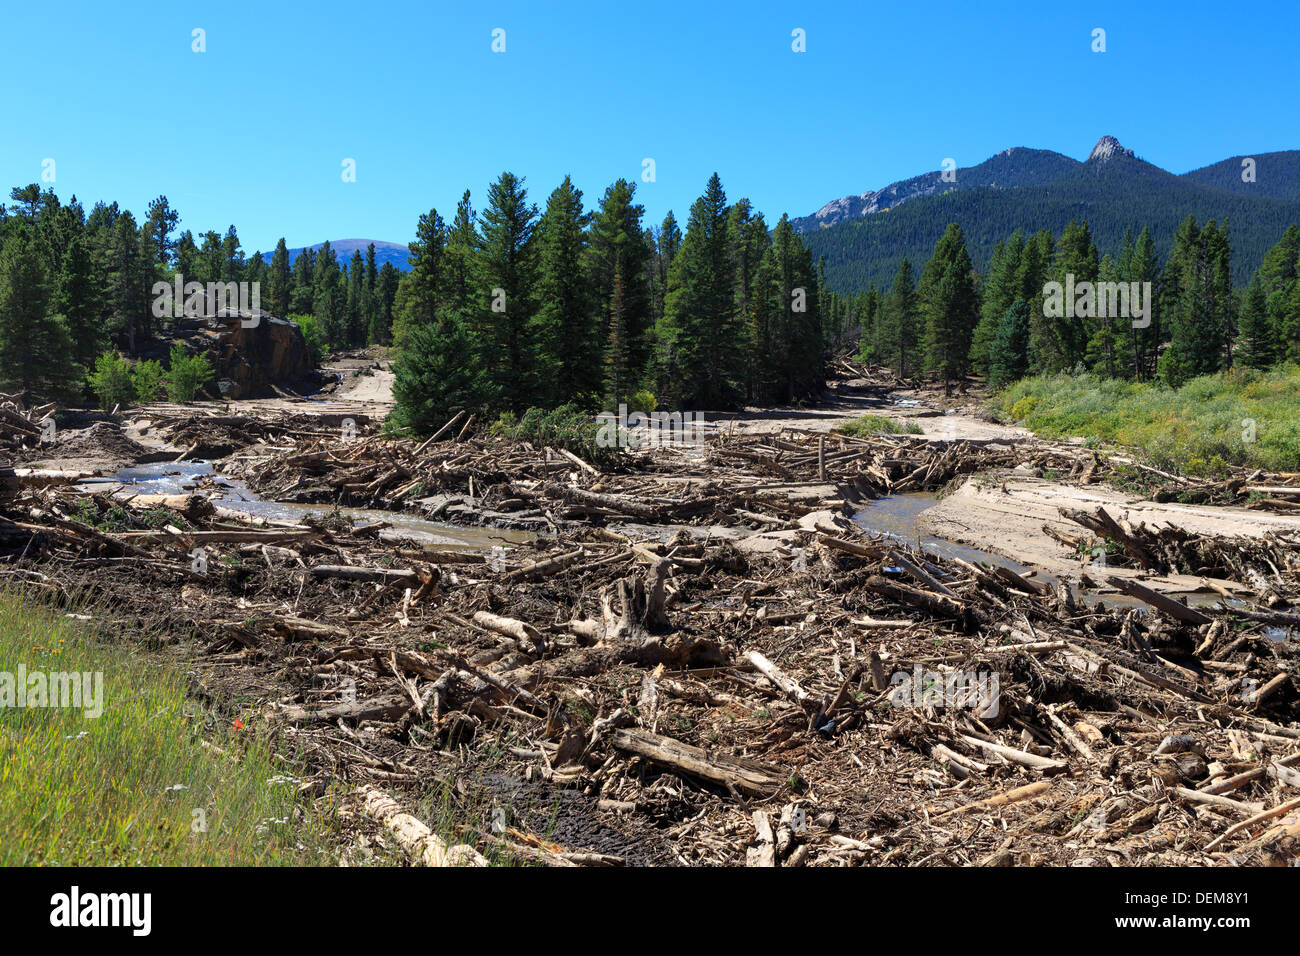 Allenspark, Colorado. 20 Sept. 2013.  The St. Malo Conference Center, a historic landmark where Pope John Paul II stayed during his visit to Colorado is damaged due to flash flooding.  The Chapel on Rock did not sustain any flood damage. Credit:  Ed Endicott/Alamy Live News Stock Photo